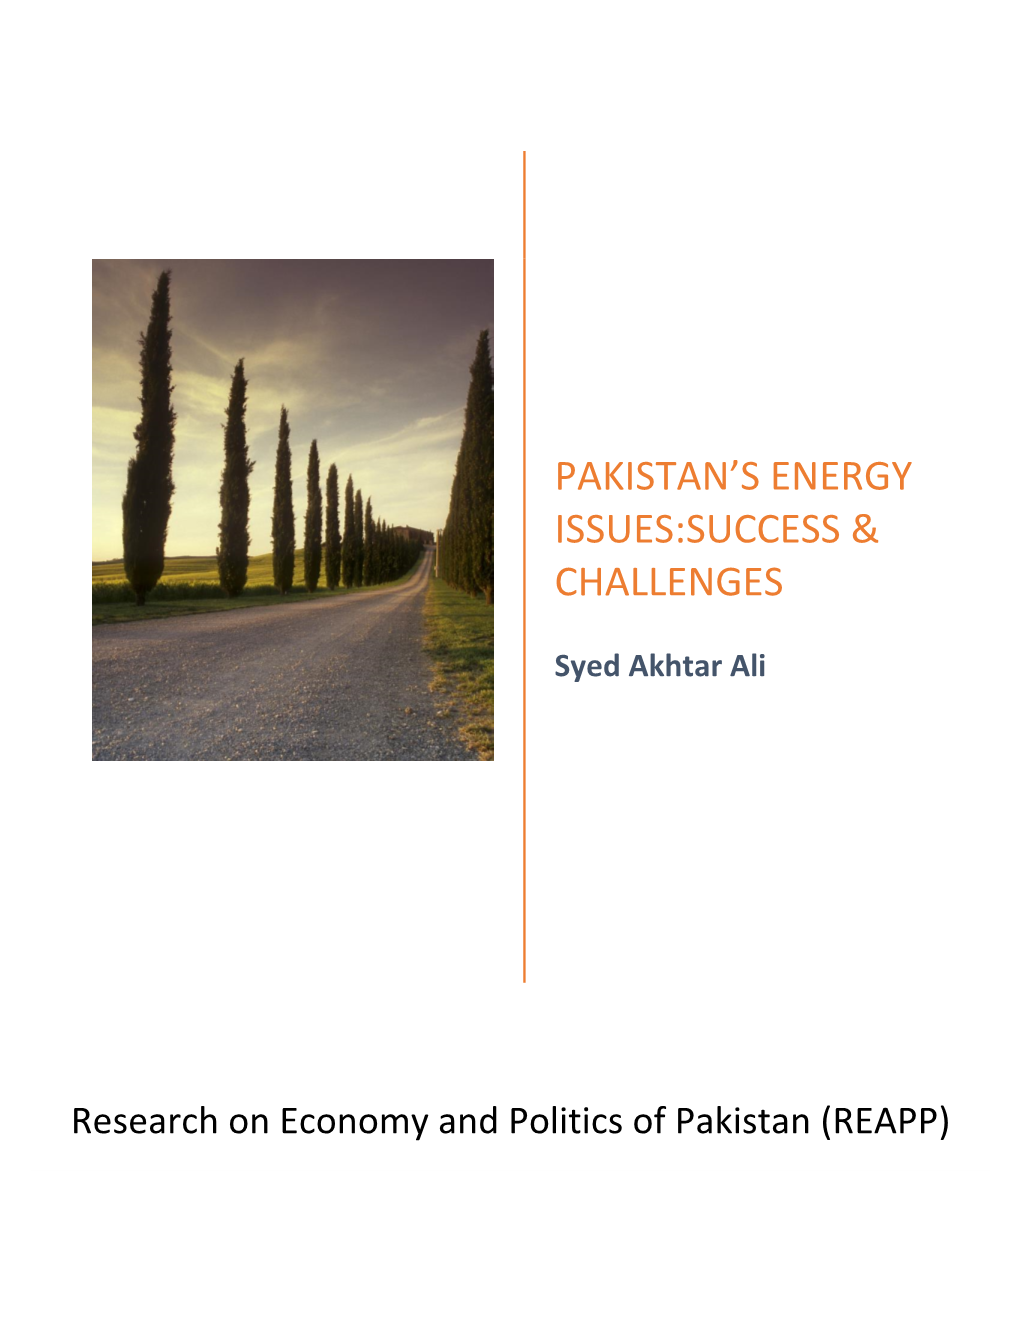 Pakistan's Energy Issues:Success & Challenges